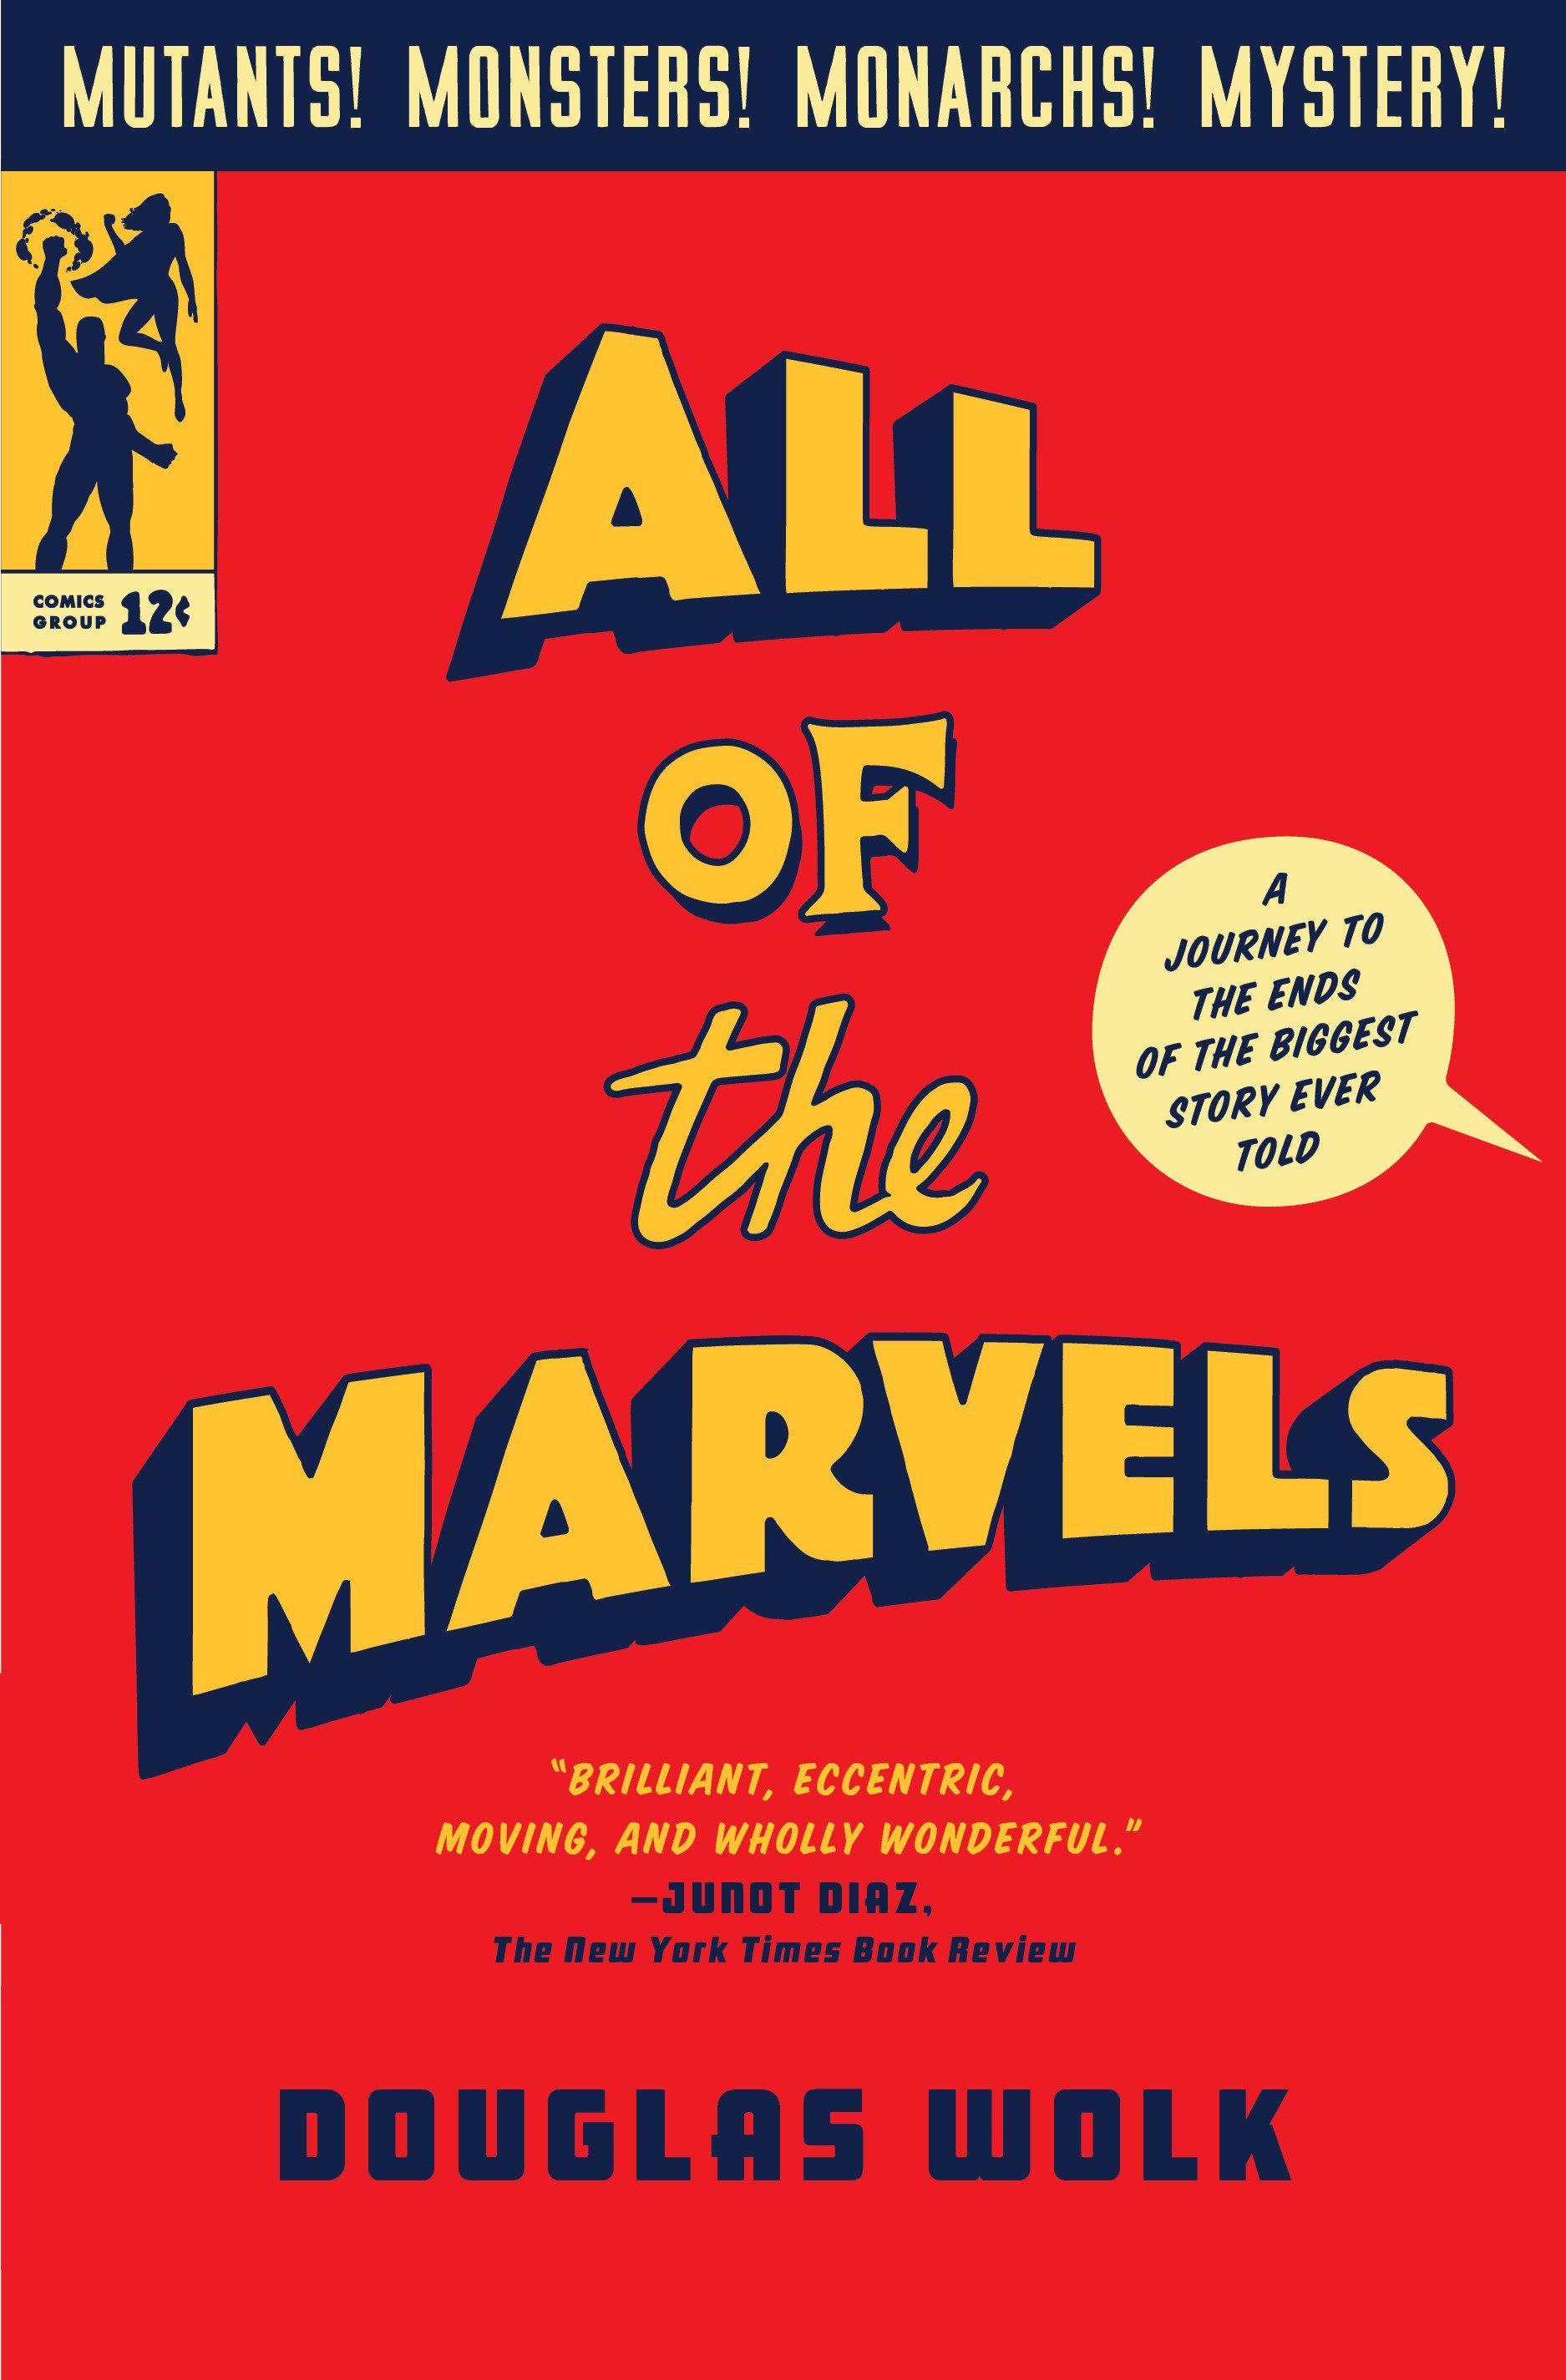 All of the Marvels: A Journey to the Ends of the Biggest Story Ever Told / Douglas Wolk / Buch / Einband - fest (Hardcover) / Englisch / 2021 / PENGUIN PR / EAN 9780735222168 - Wolk, Douglas